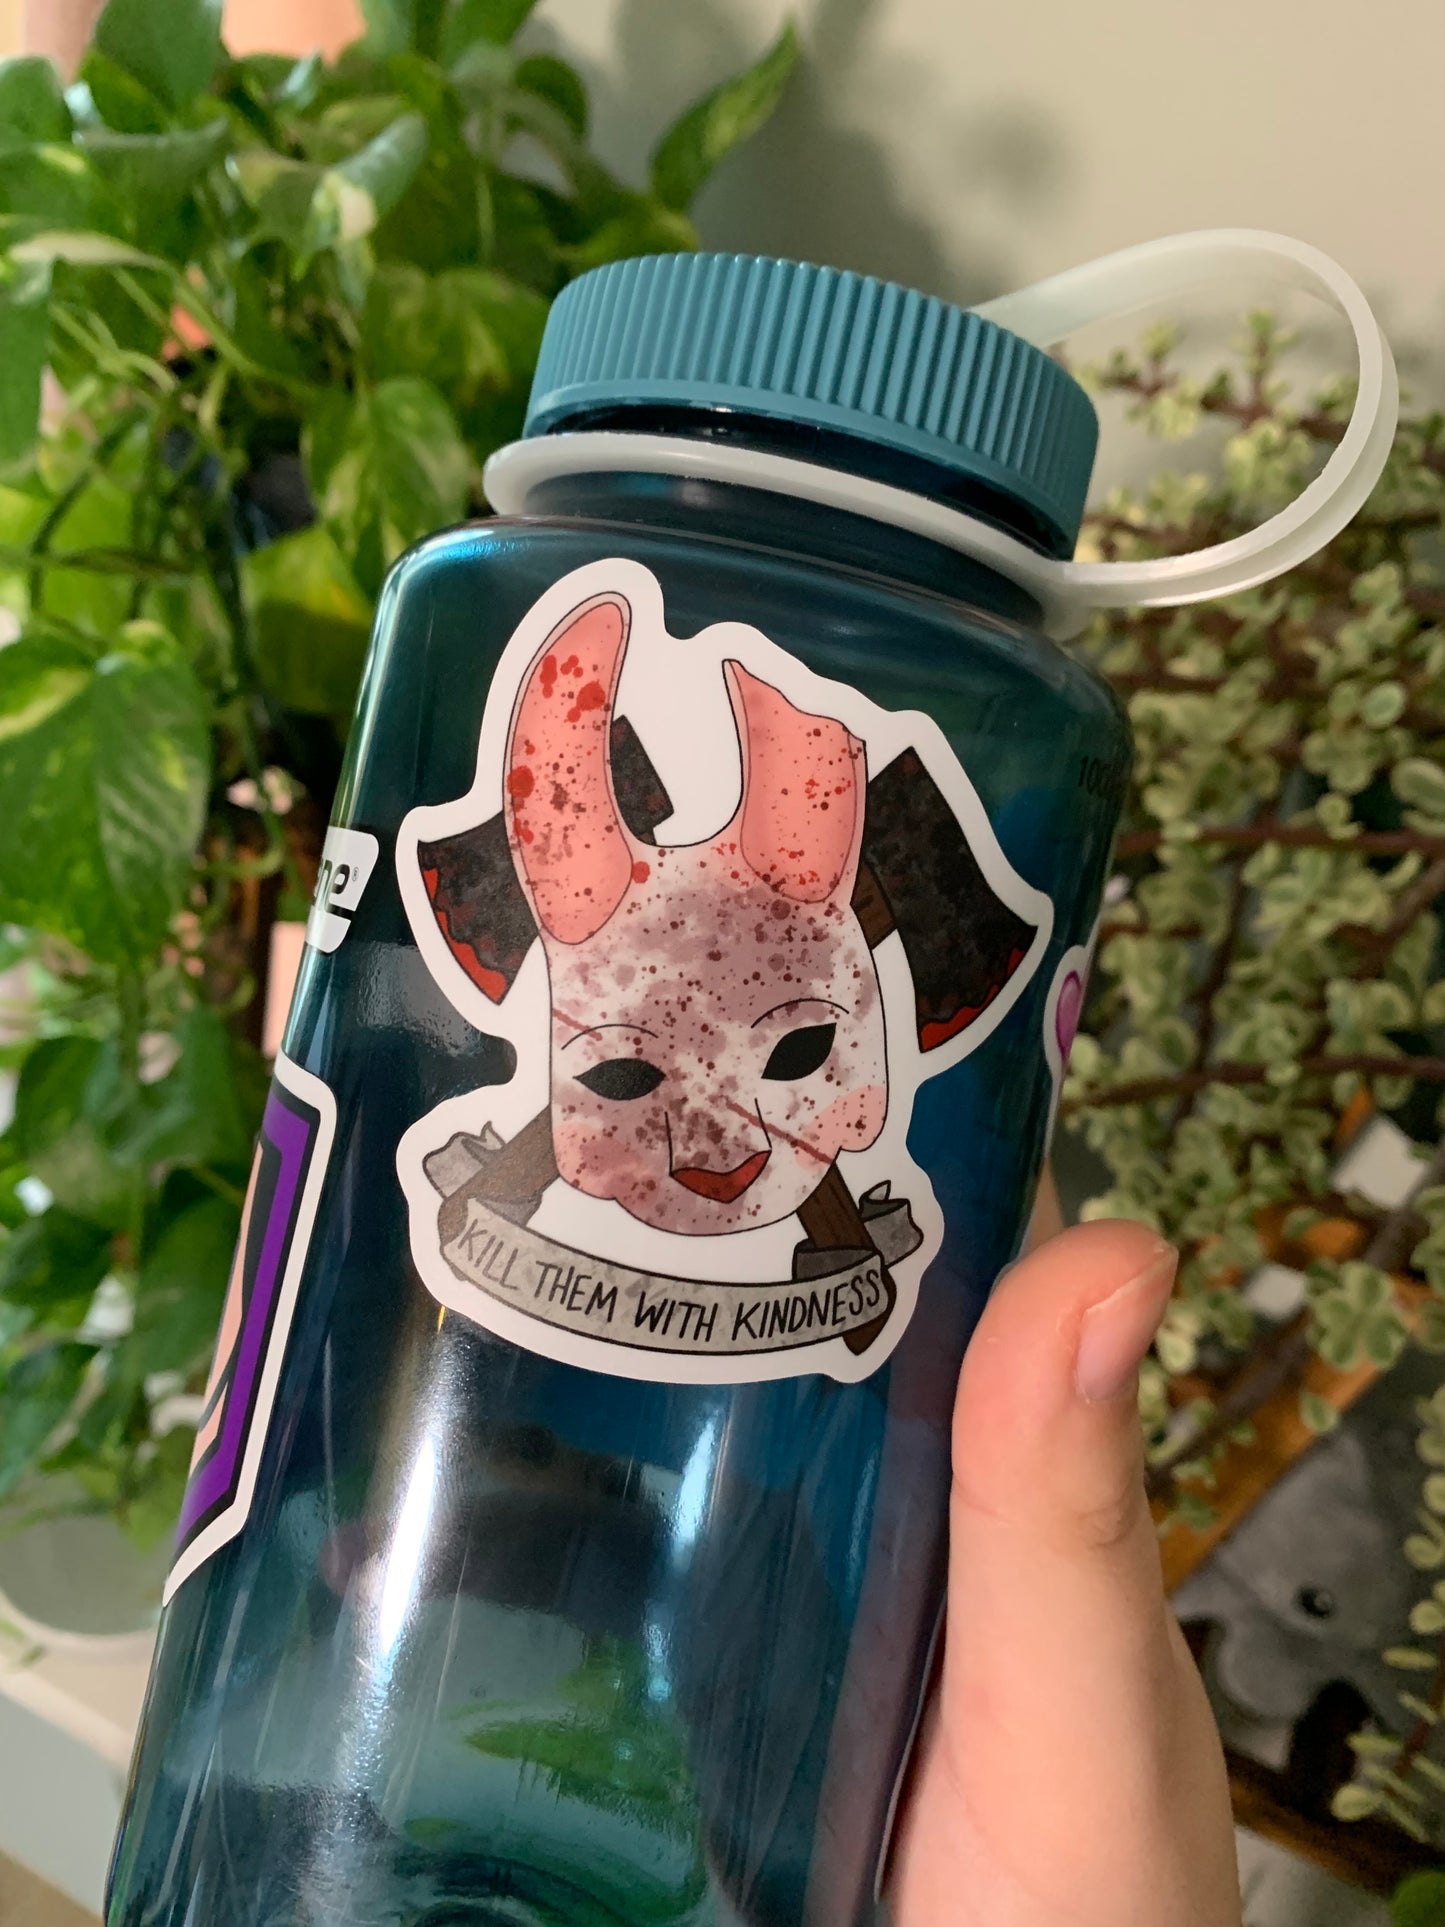 Our Huntress mask sticker featured on a blue nalgene water bottle, held in front of house plants.